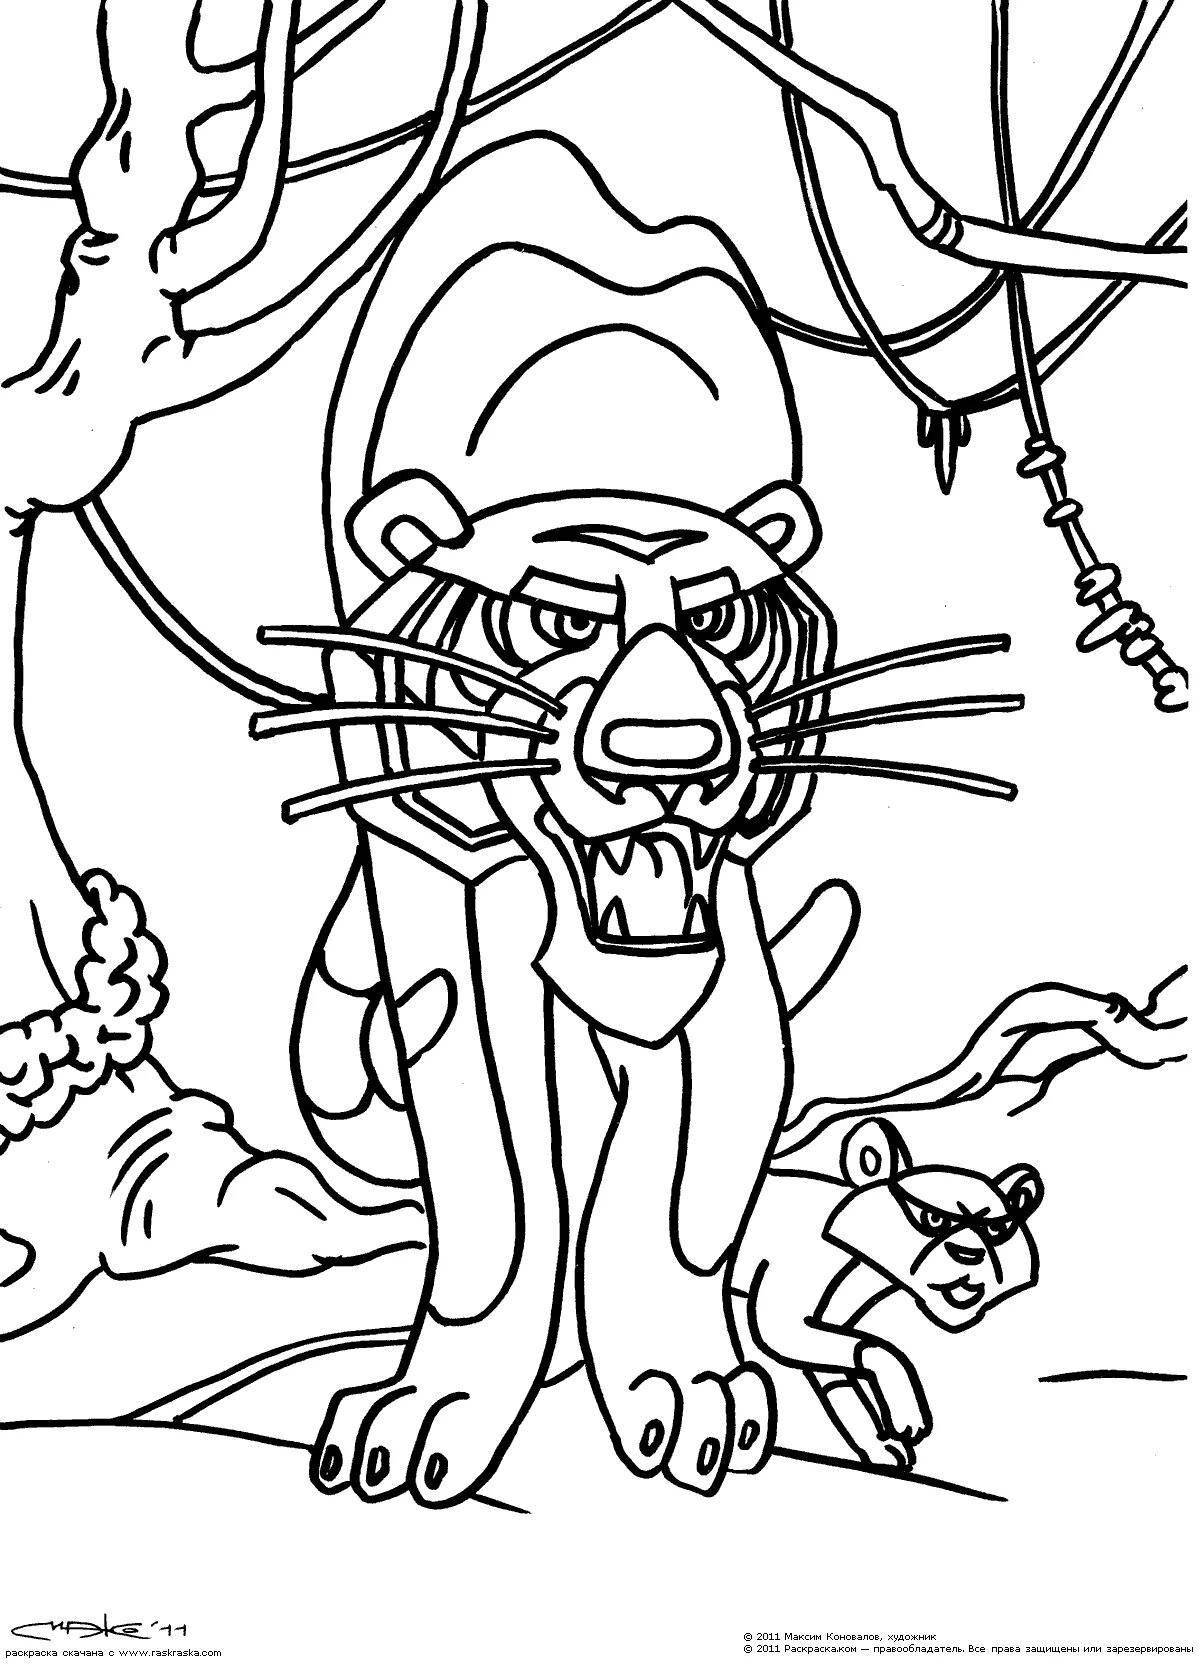 Colouring page stunningly colored tiger sherkhan